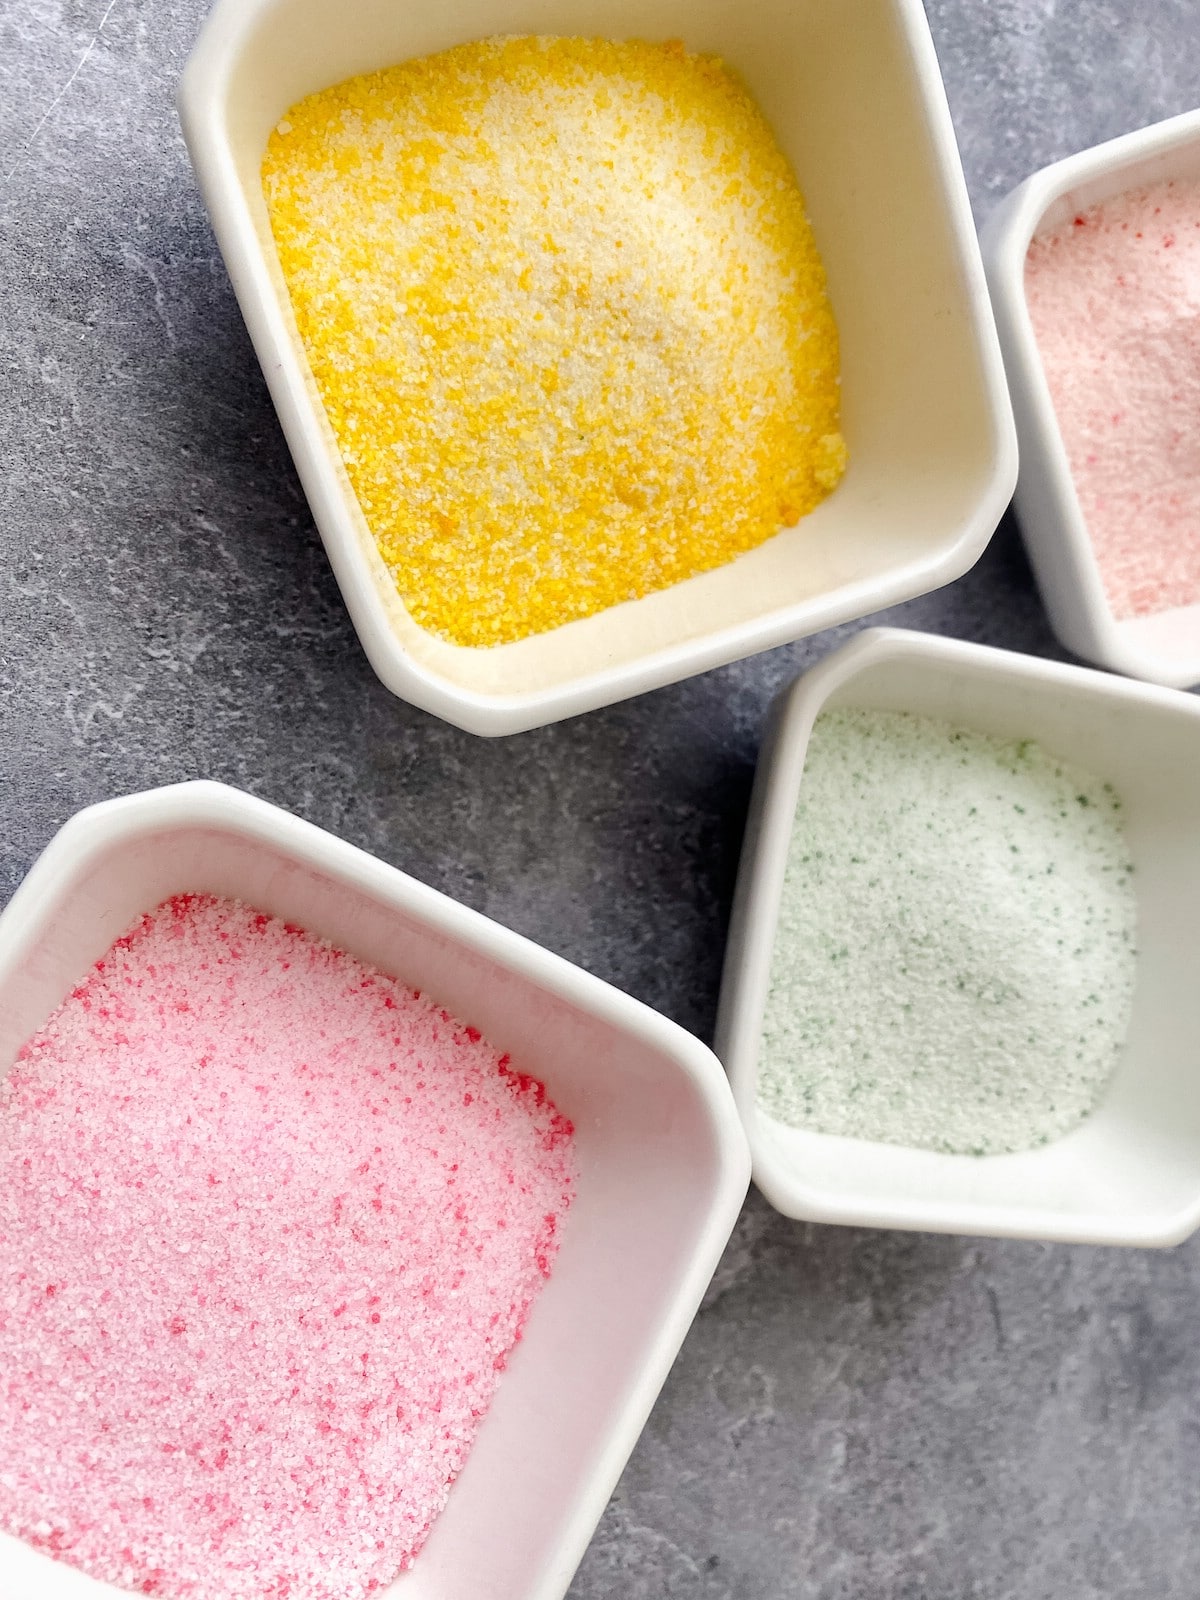 Yellow green and pink sugar in white bowls